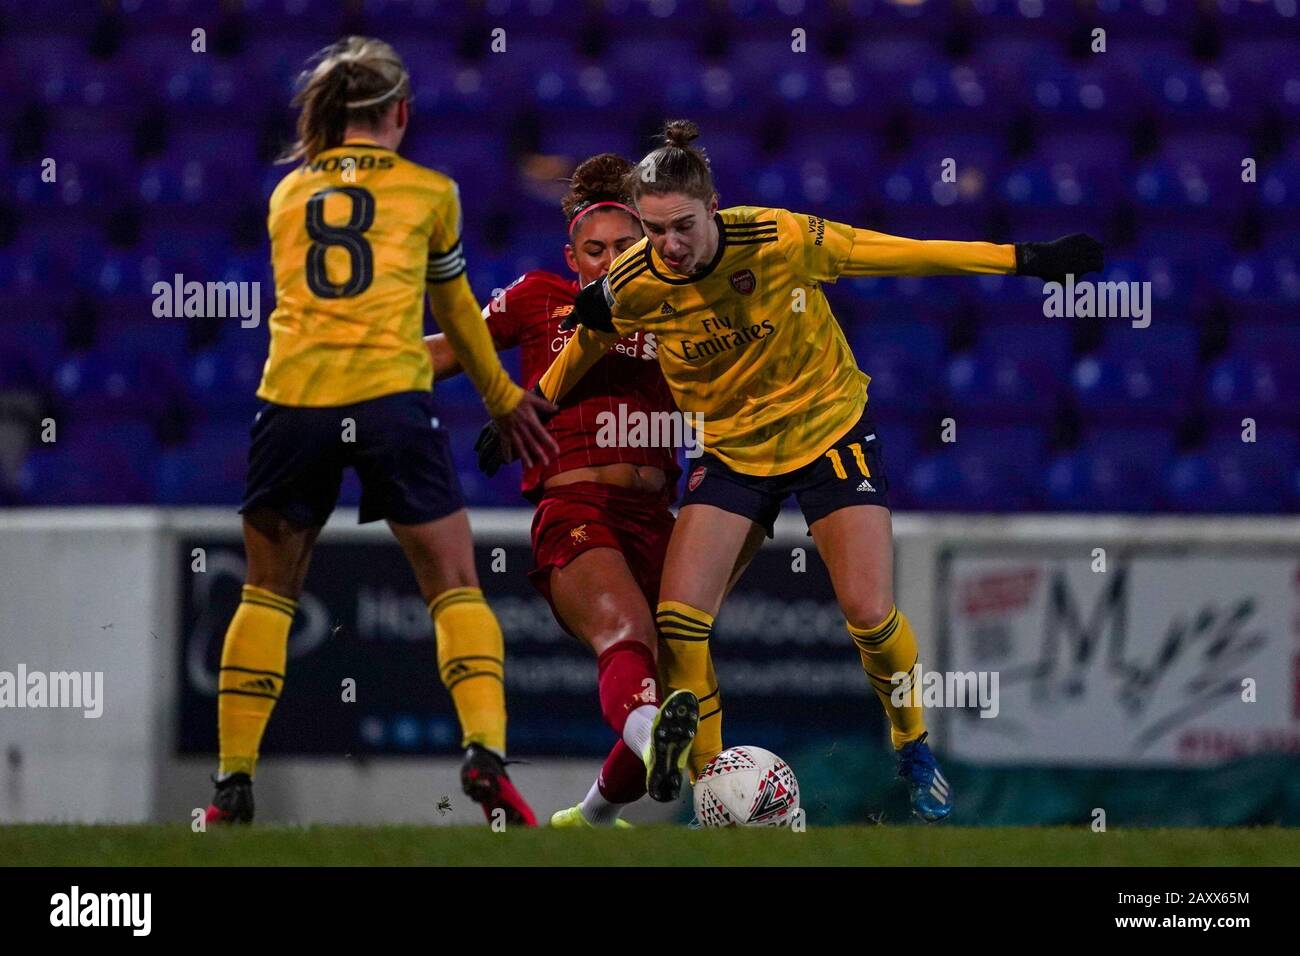 CHESTER. ENGLAND. FEB 13th: Vivianne Miedema of Arsenal in attack  during the Women’s Super League game between Liverpool Women and Arsenal Women at The Deva Stadium in Chester, England. (Photo by Daniela Porcelli/SPP) Stock Photo